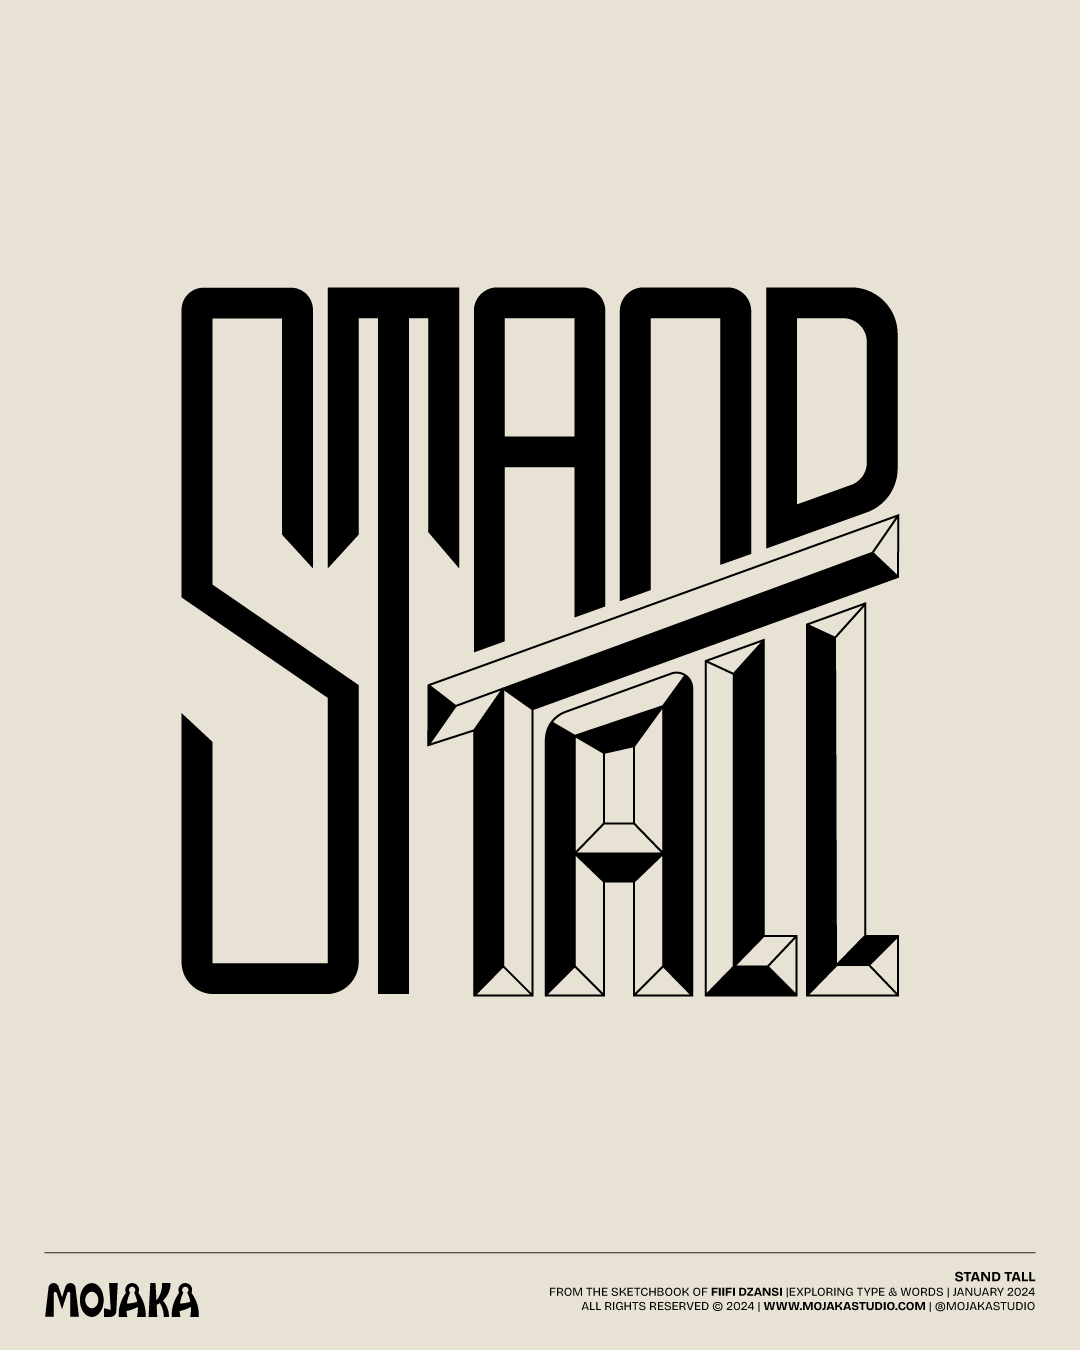 Stand tall type design in black.